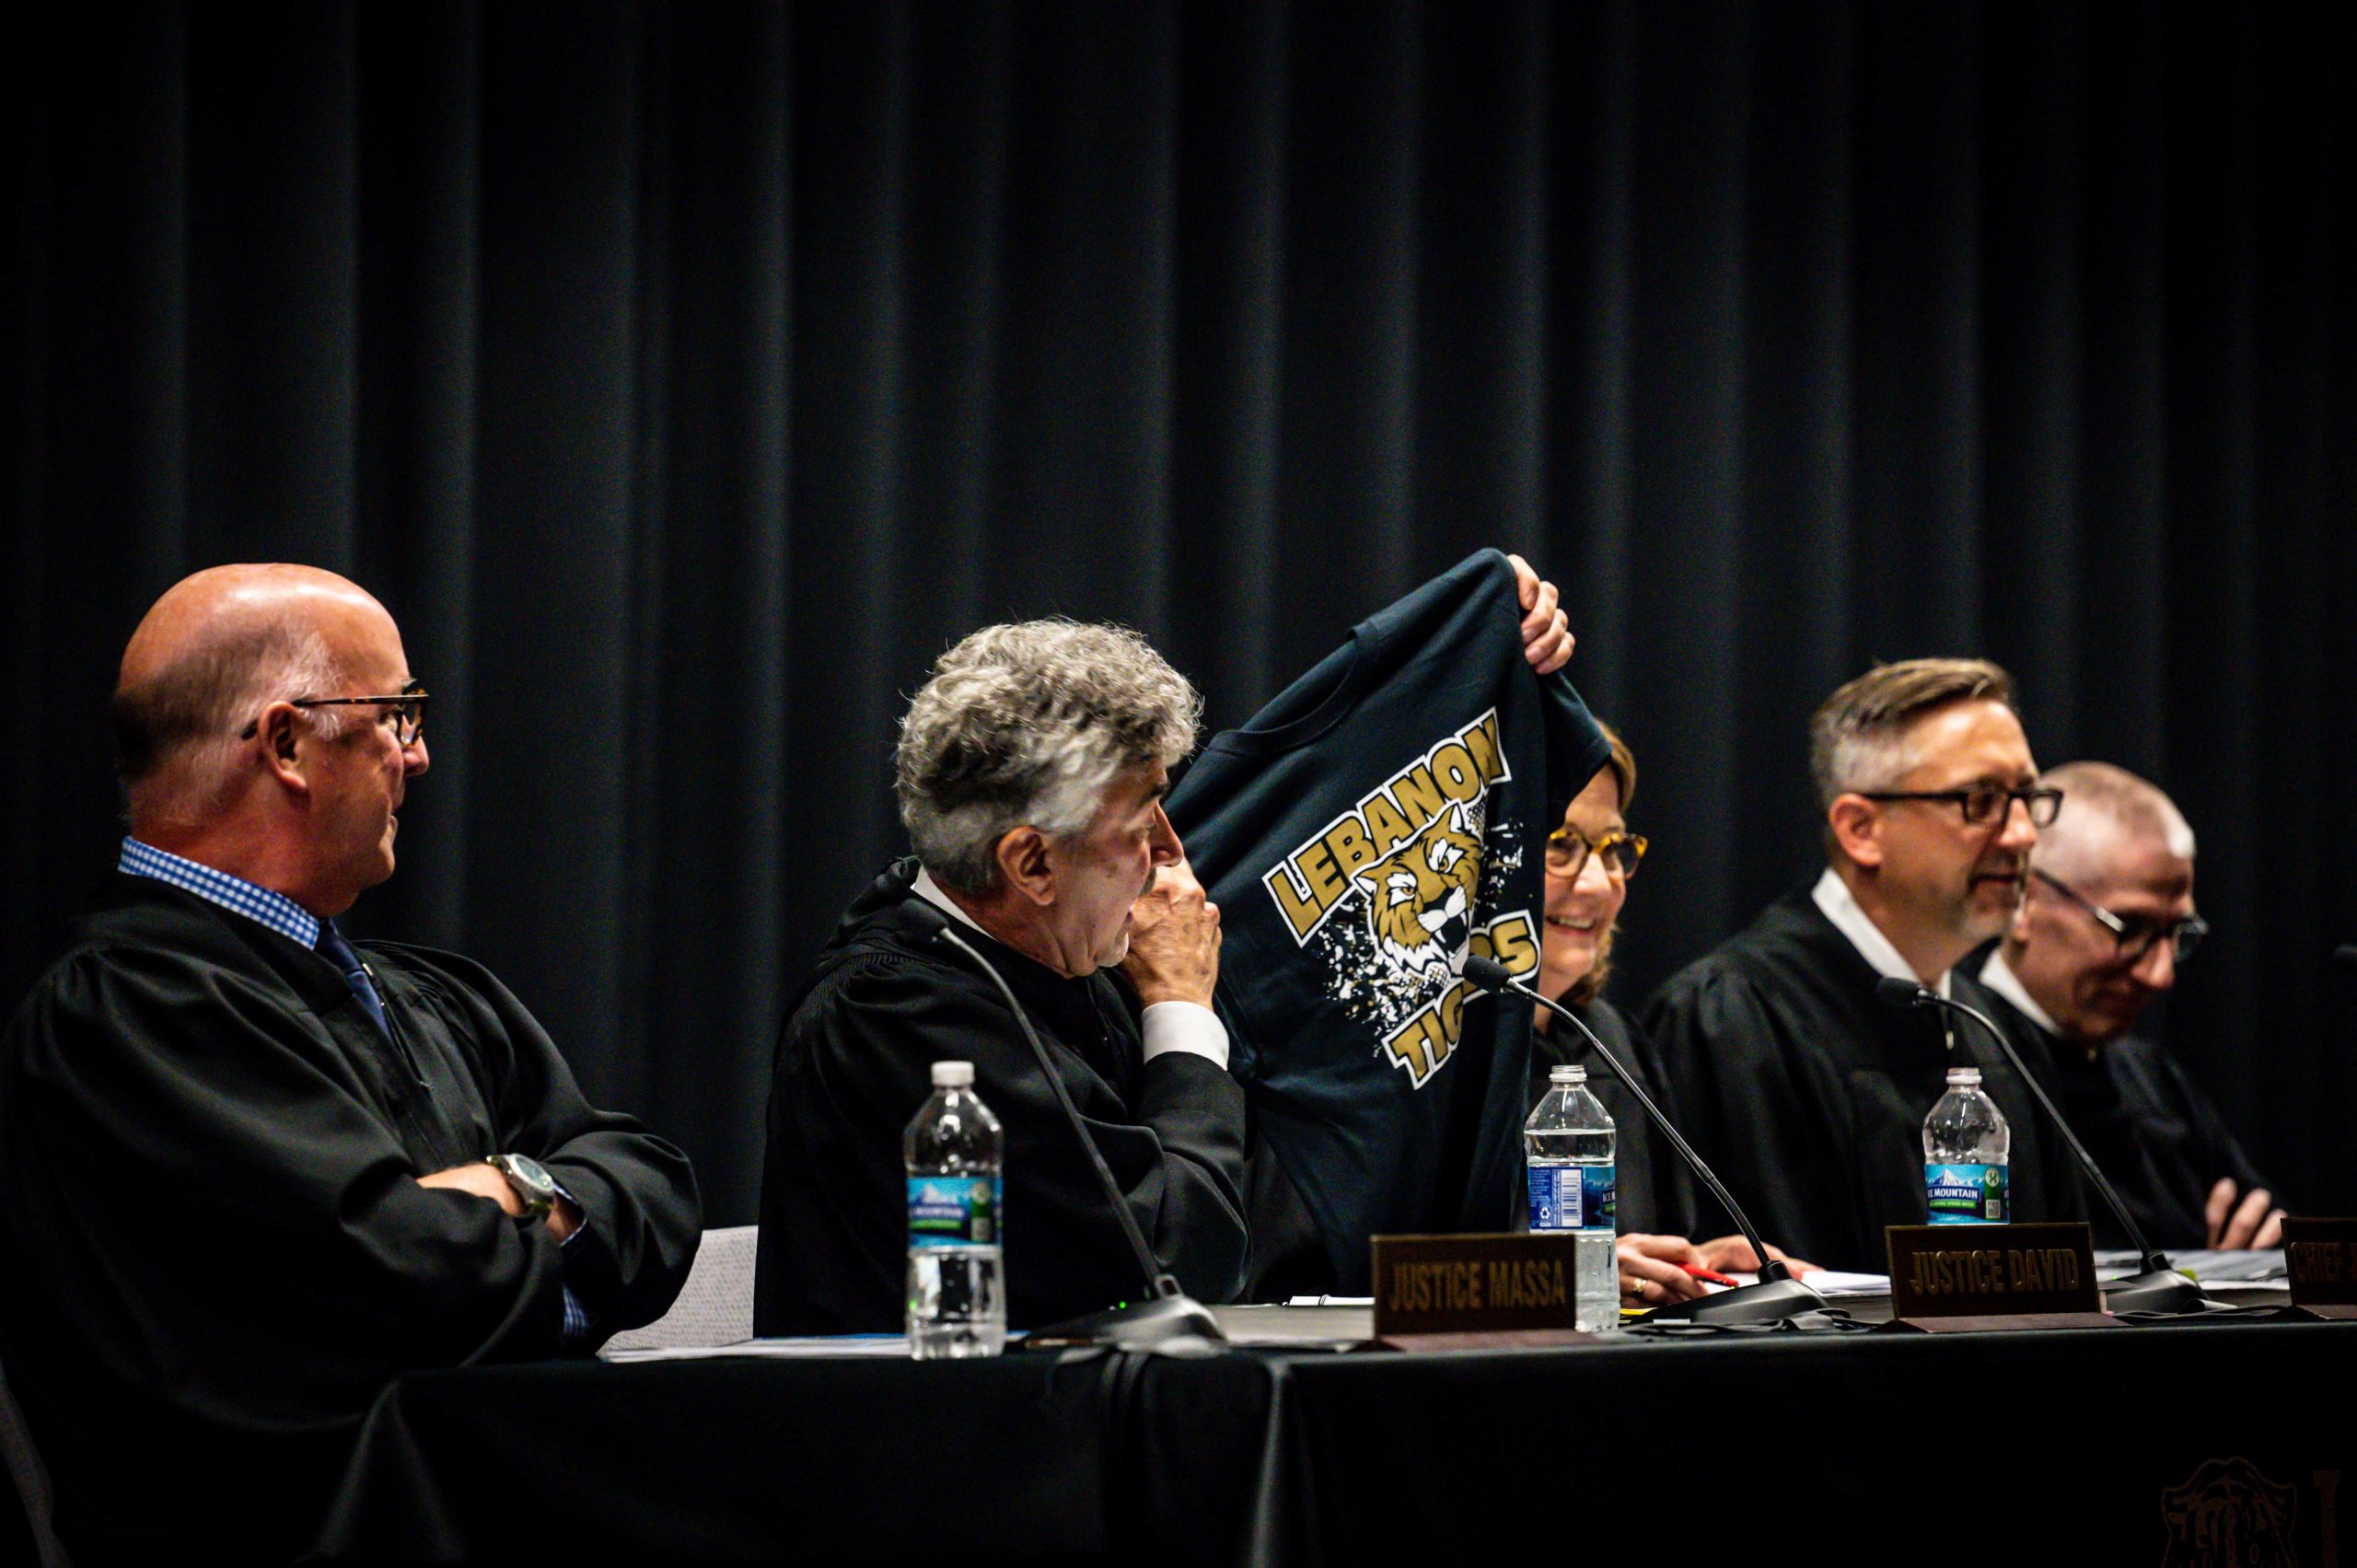 The five Justices sitting at the traveling bench at Lebanon High School with Justice David holding up a Lebanon Tigers t-shirt.